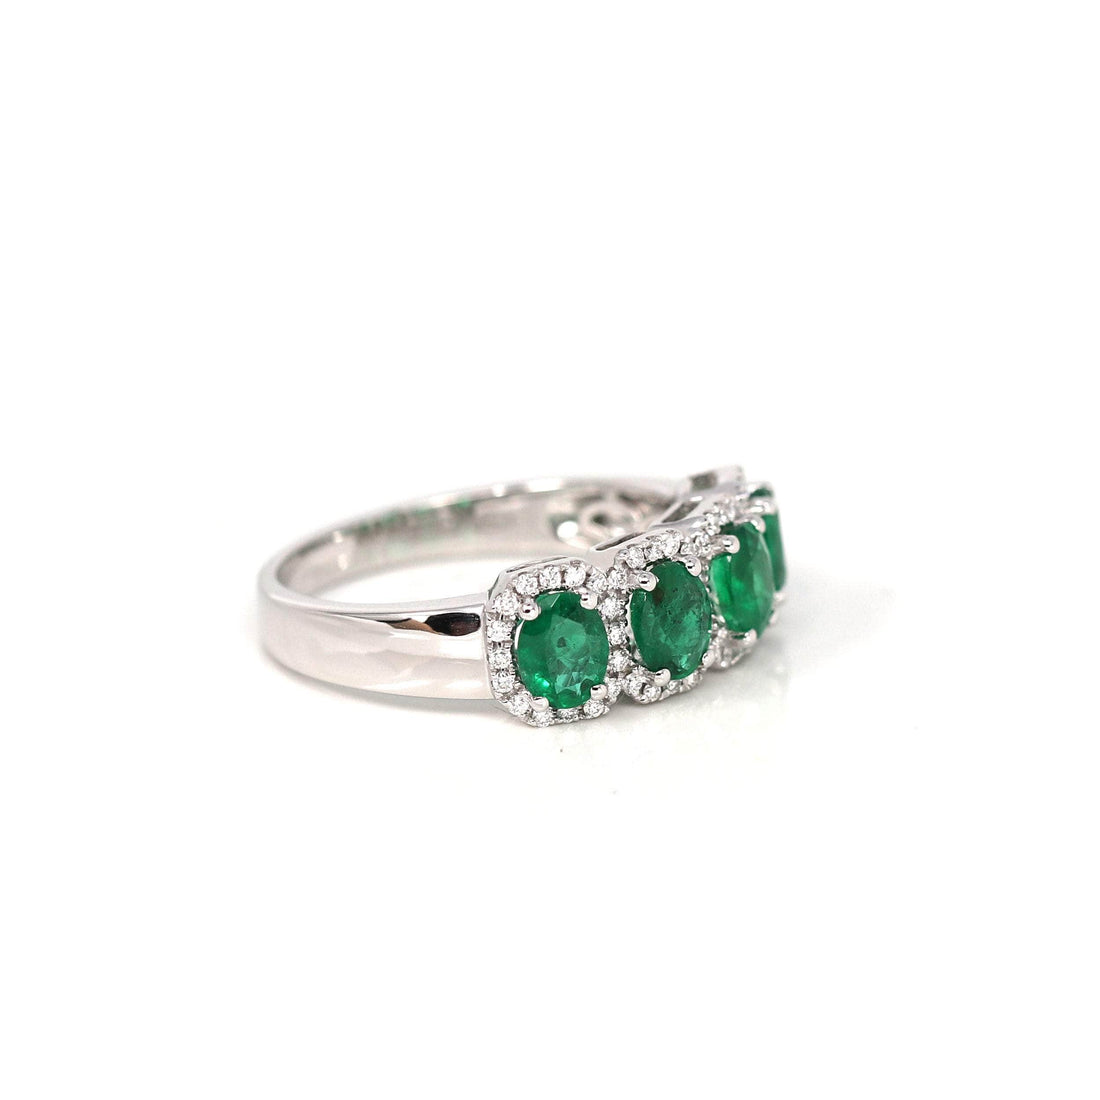 Baikalla Jewelry Gold Emerald Ring 5 18k White Gold Natural Emerald Four Stones Set Band Ring with Diamonds